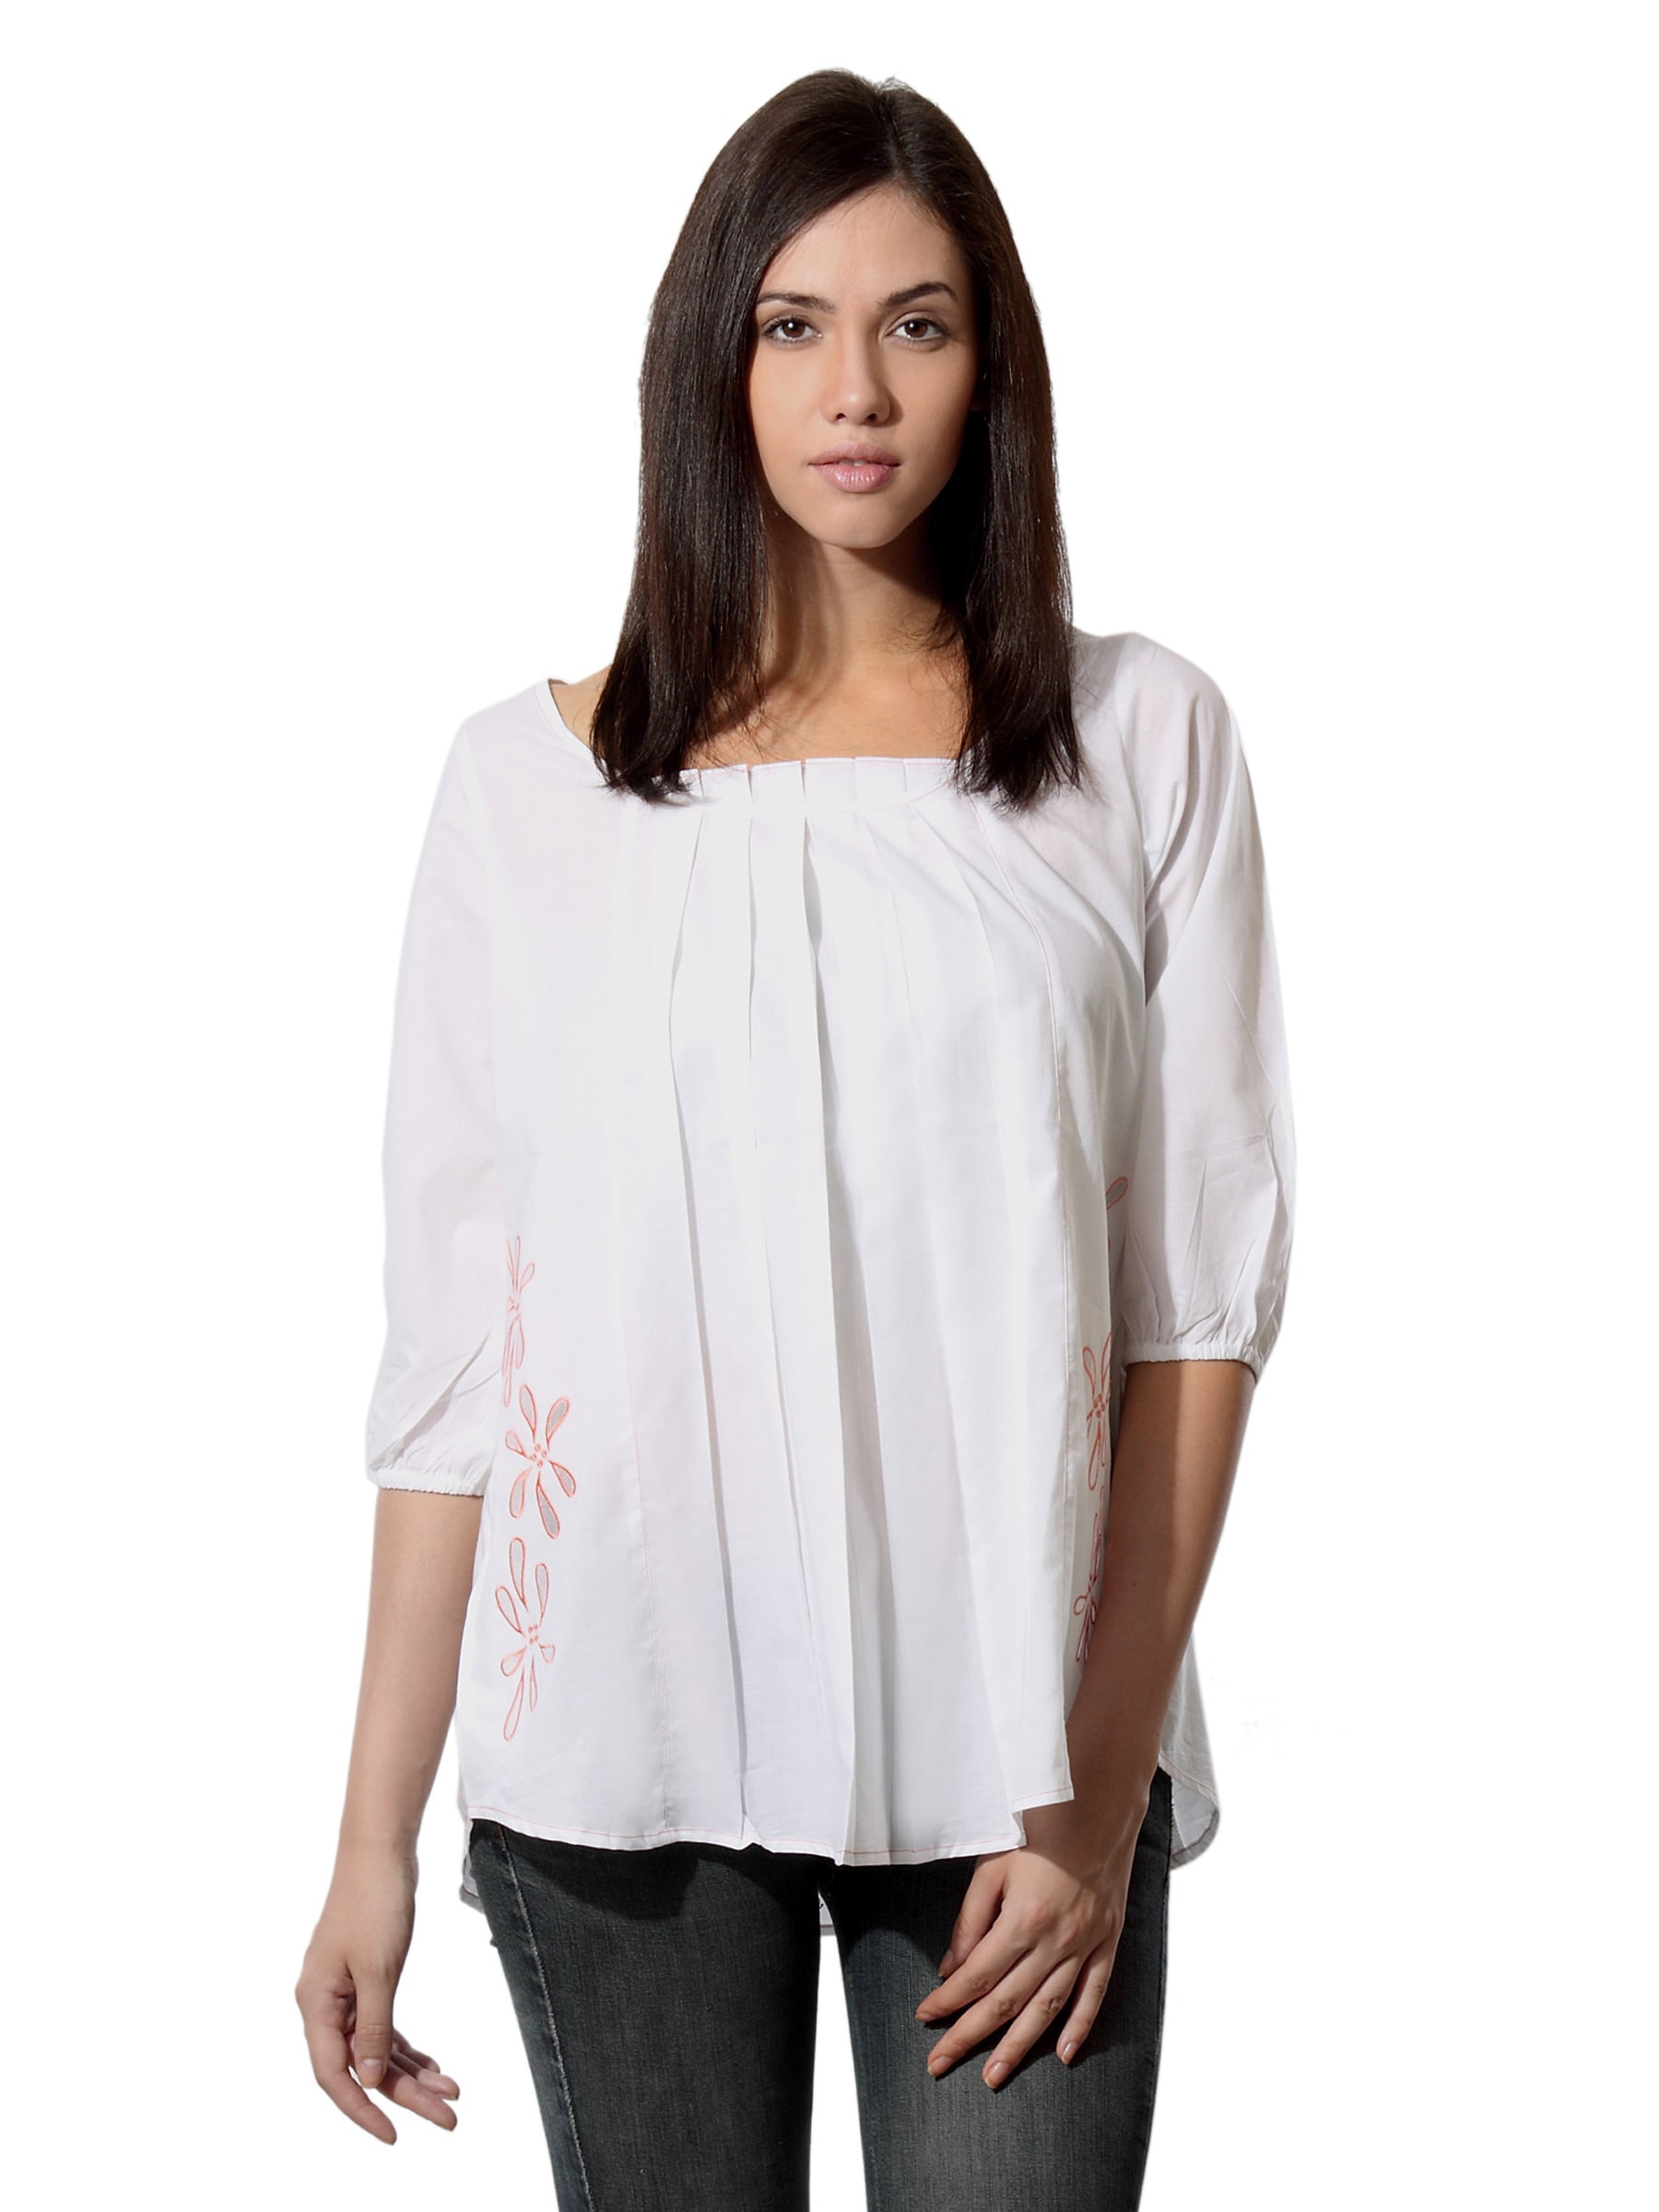 Mineral Women White Top